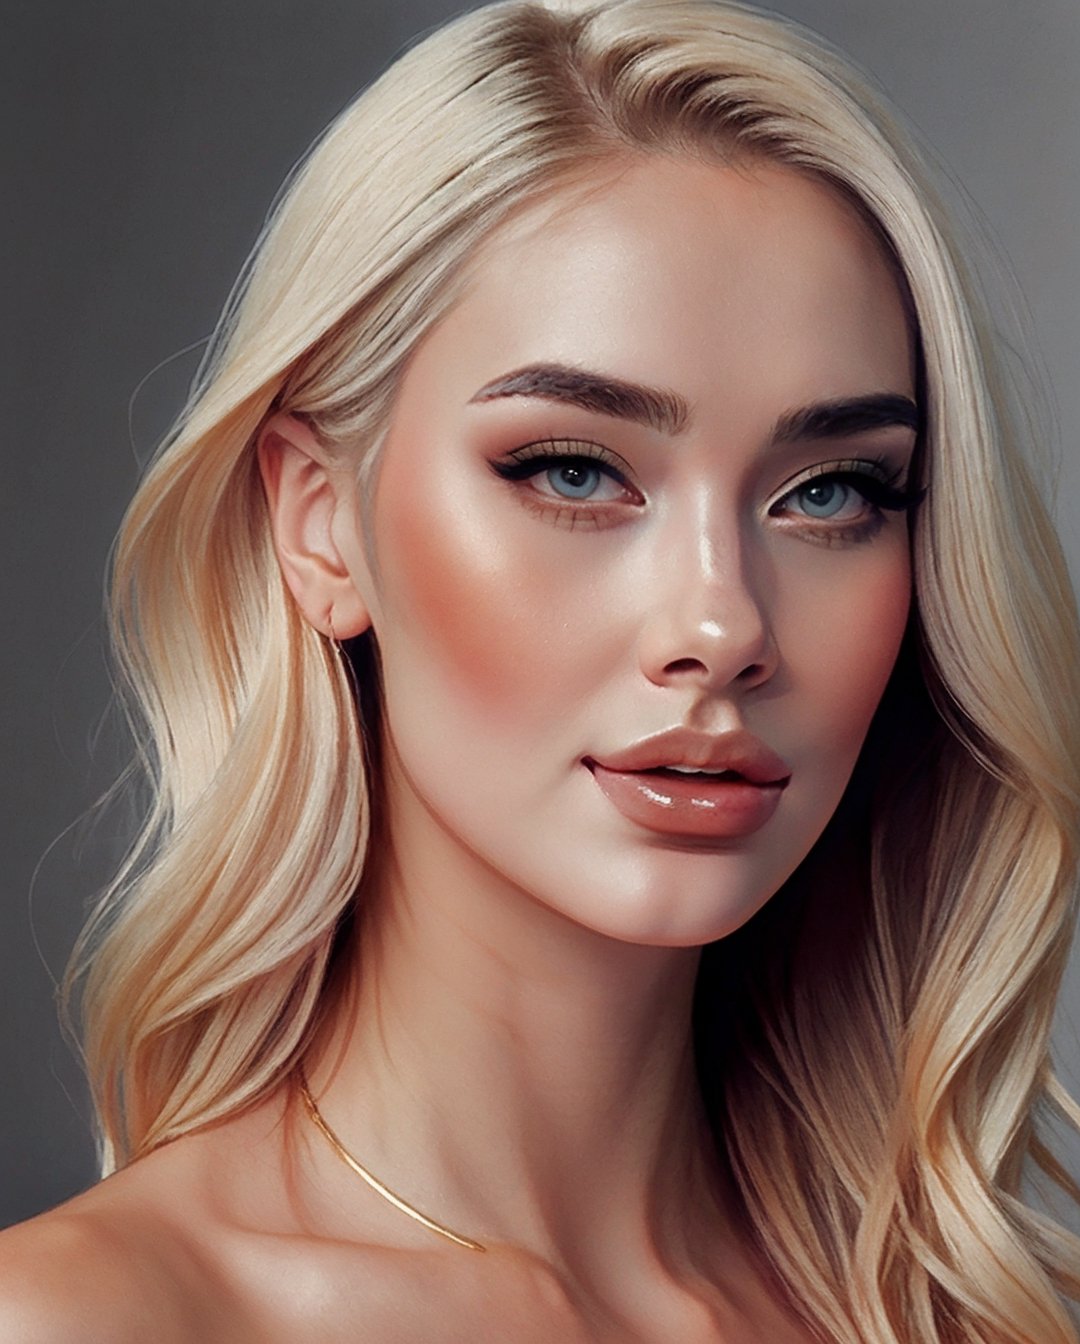 a painting of a woman with blonde hair, rossdraws portrait, realistic artstyle, trending on artstration, realistic female portrait, realistic art style, realistic portrait, realistic digital illustration, realistic digital drawing, in the art style of bowater, detailed beauty portrait, digital portrait, rossdraws, Ptcard,